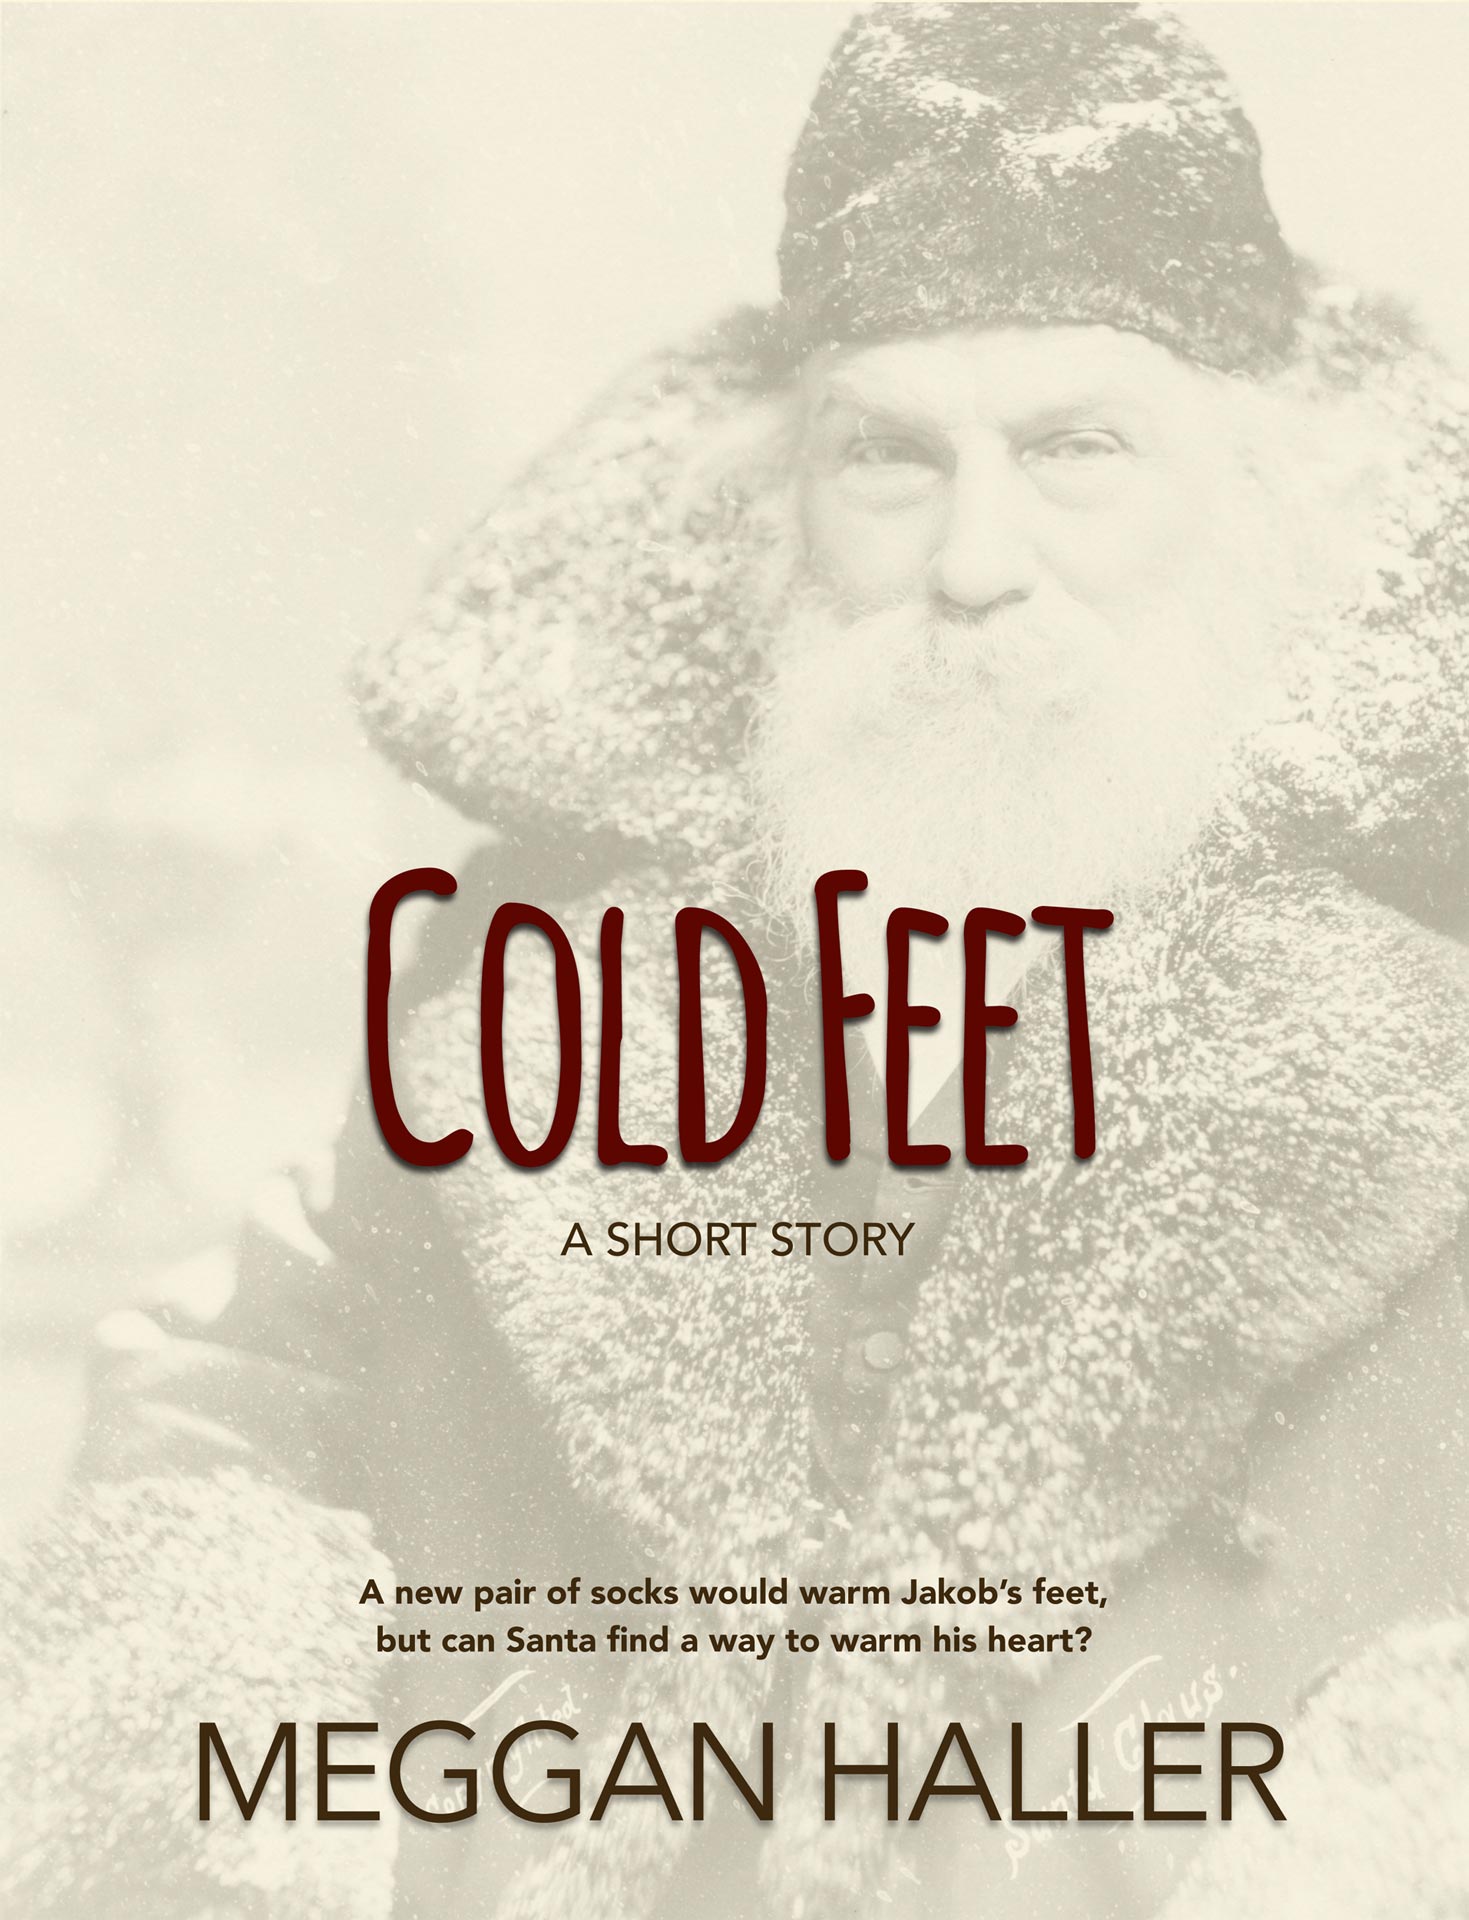 Cover image of e-book short story "Cold Feet" by Meggan Haller, a Christmas short story